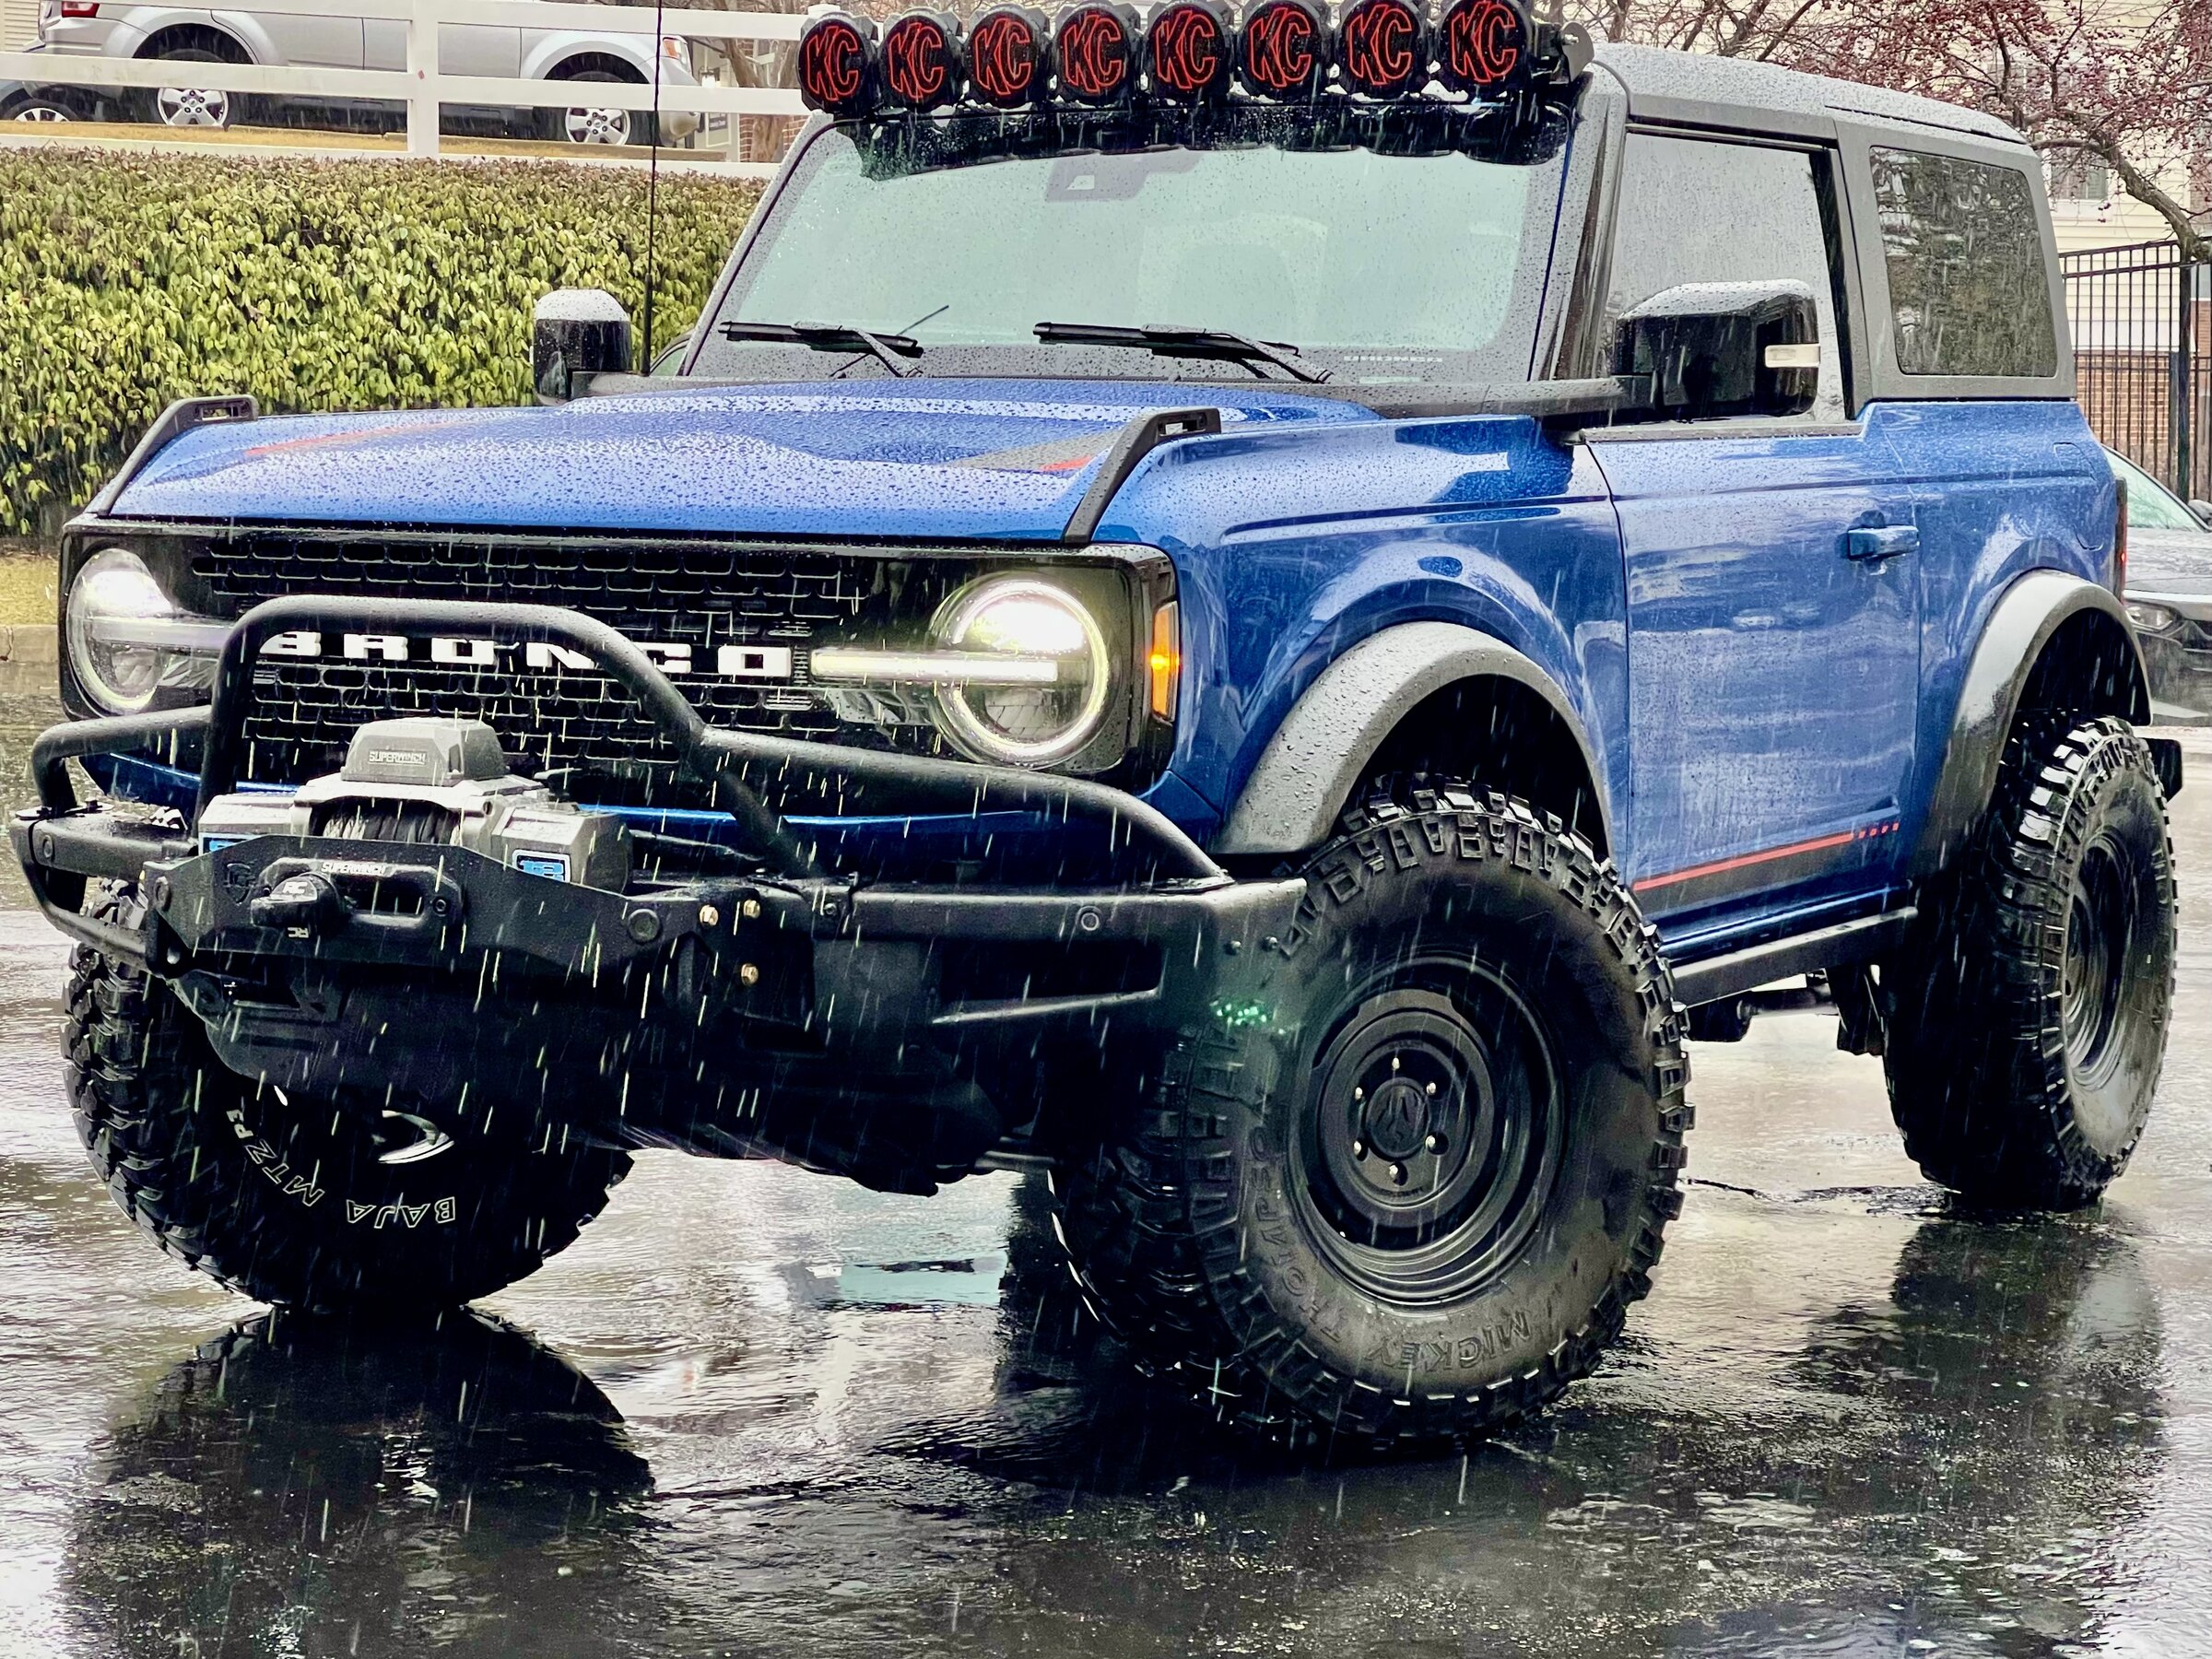 Ford Bronco Lbracket 2 door FE build (UPDATED) on Zone 3" lift and 37's 8EA8FA26-0195-434C-8DF2-4E1030C79174